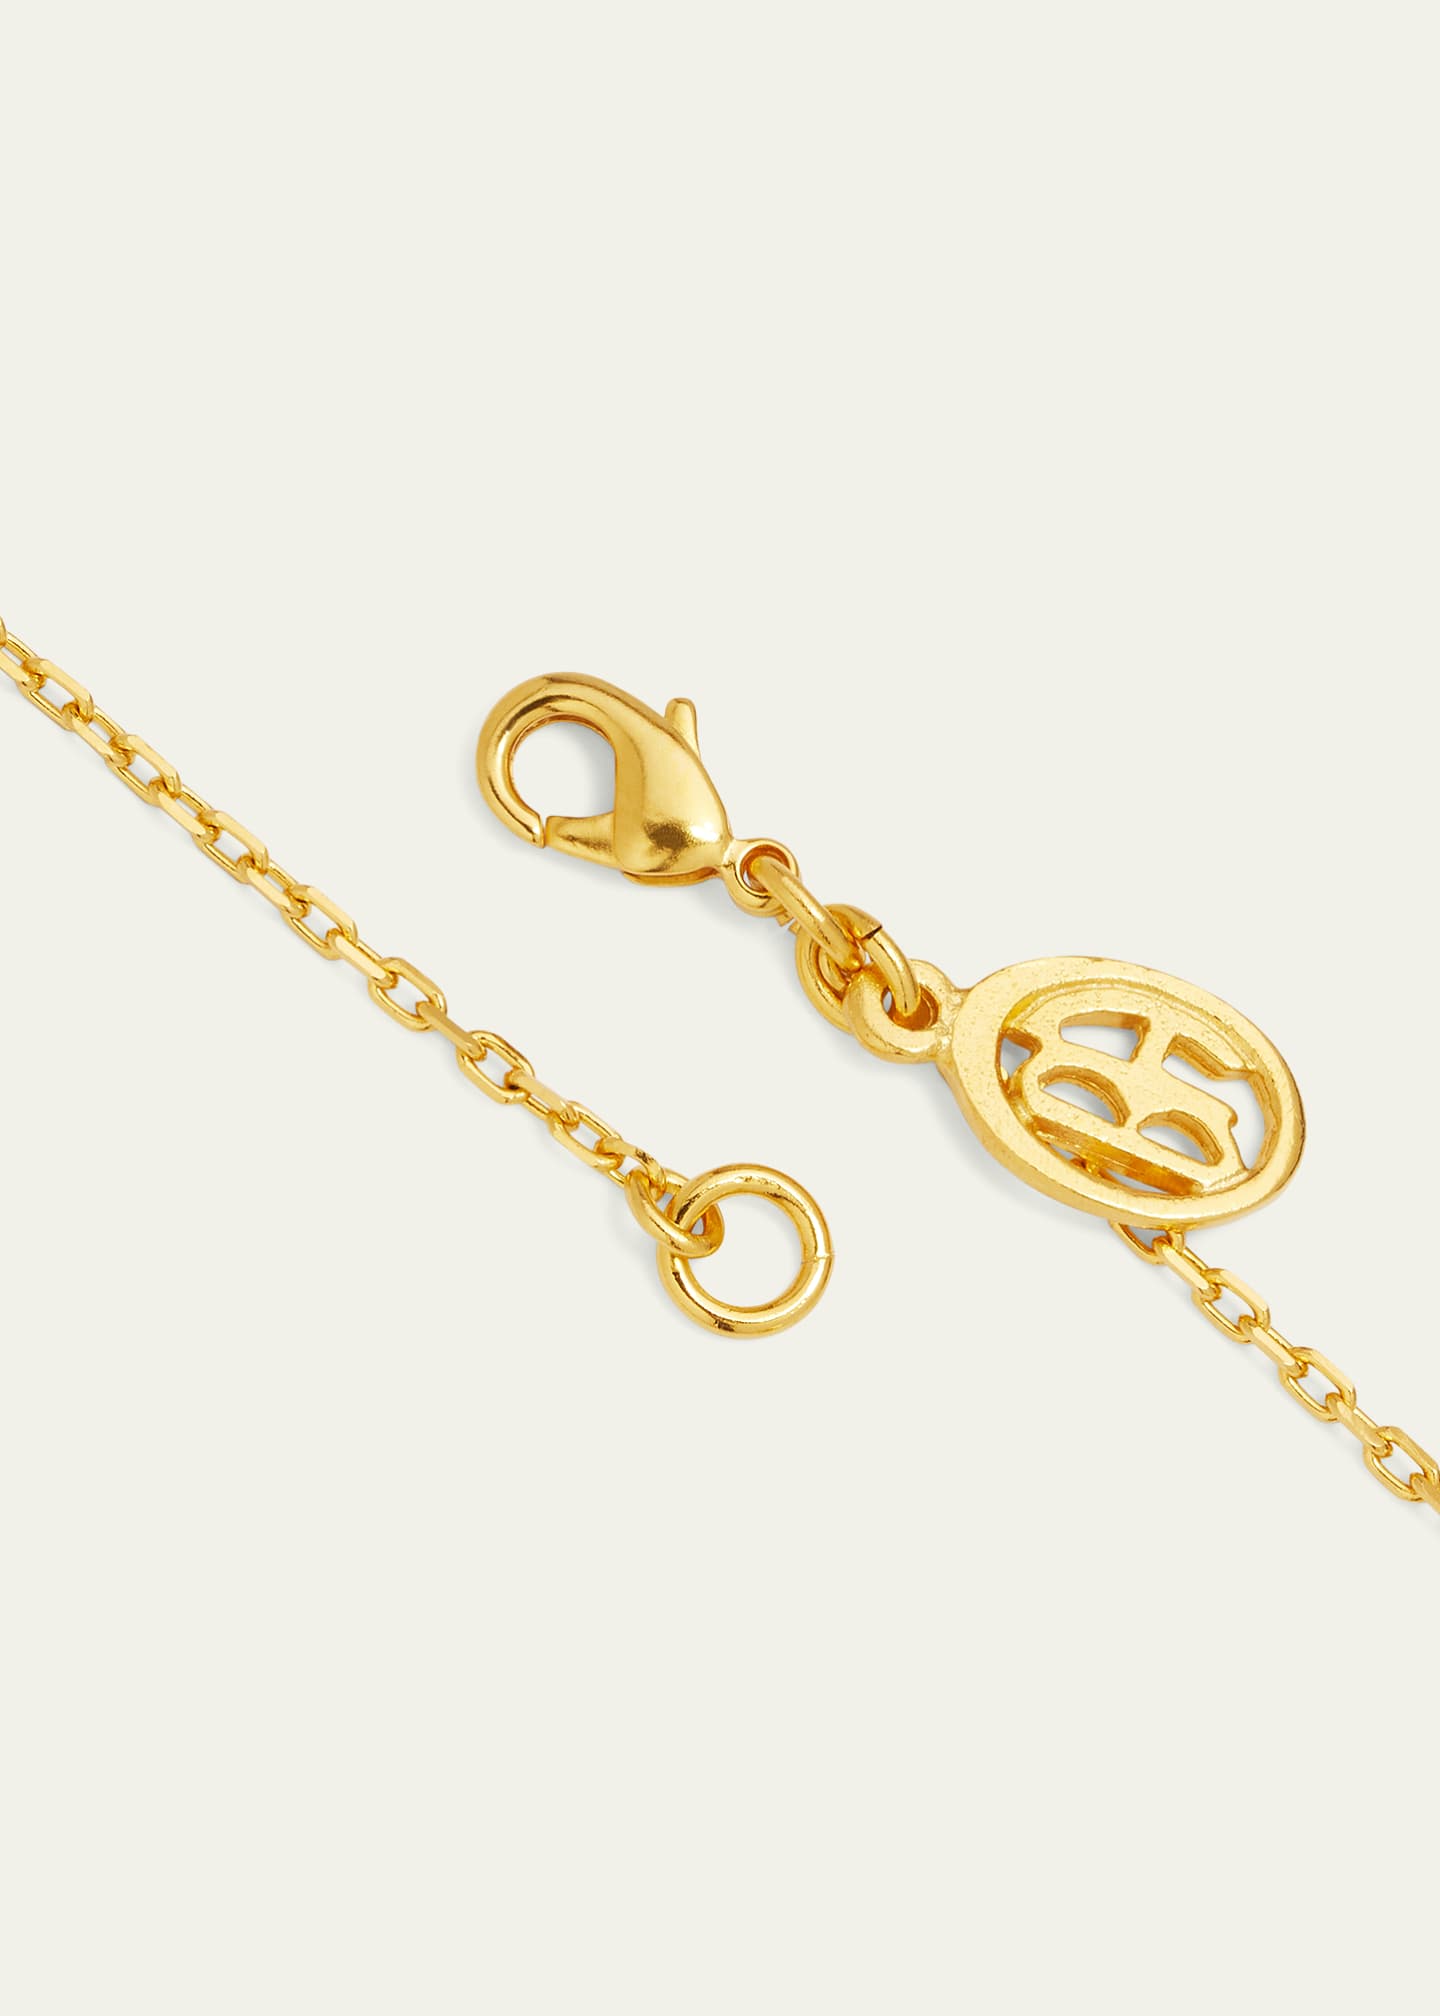 Heart Lock Necklace in 24K Gold Plating by oNecklace